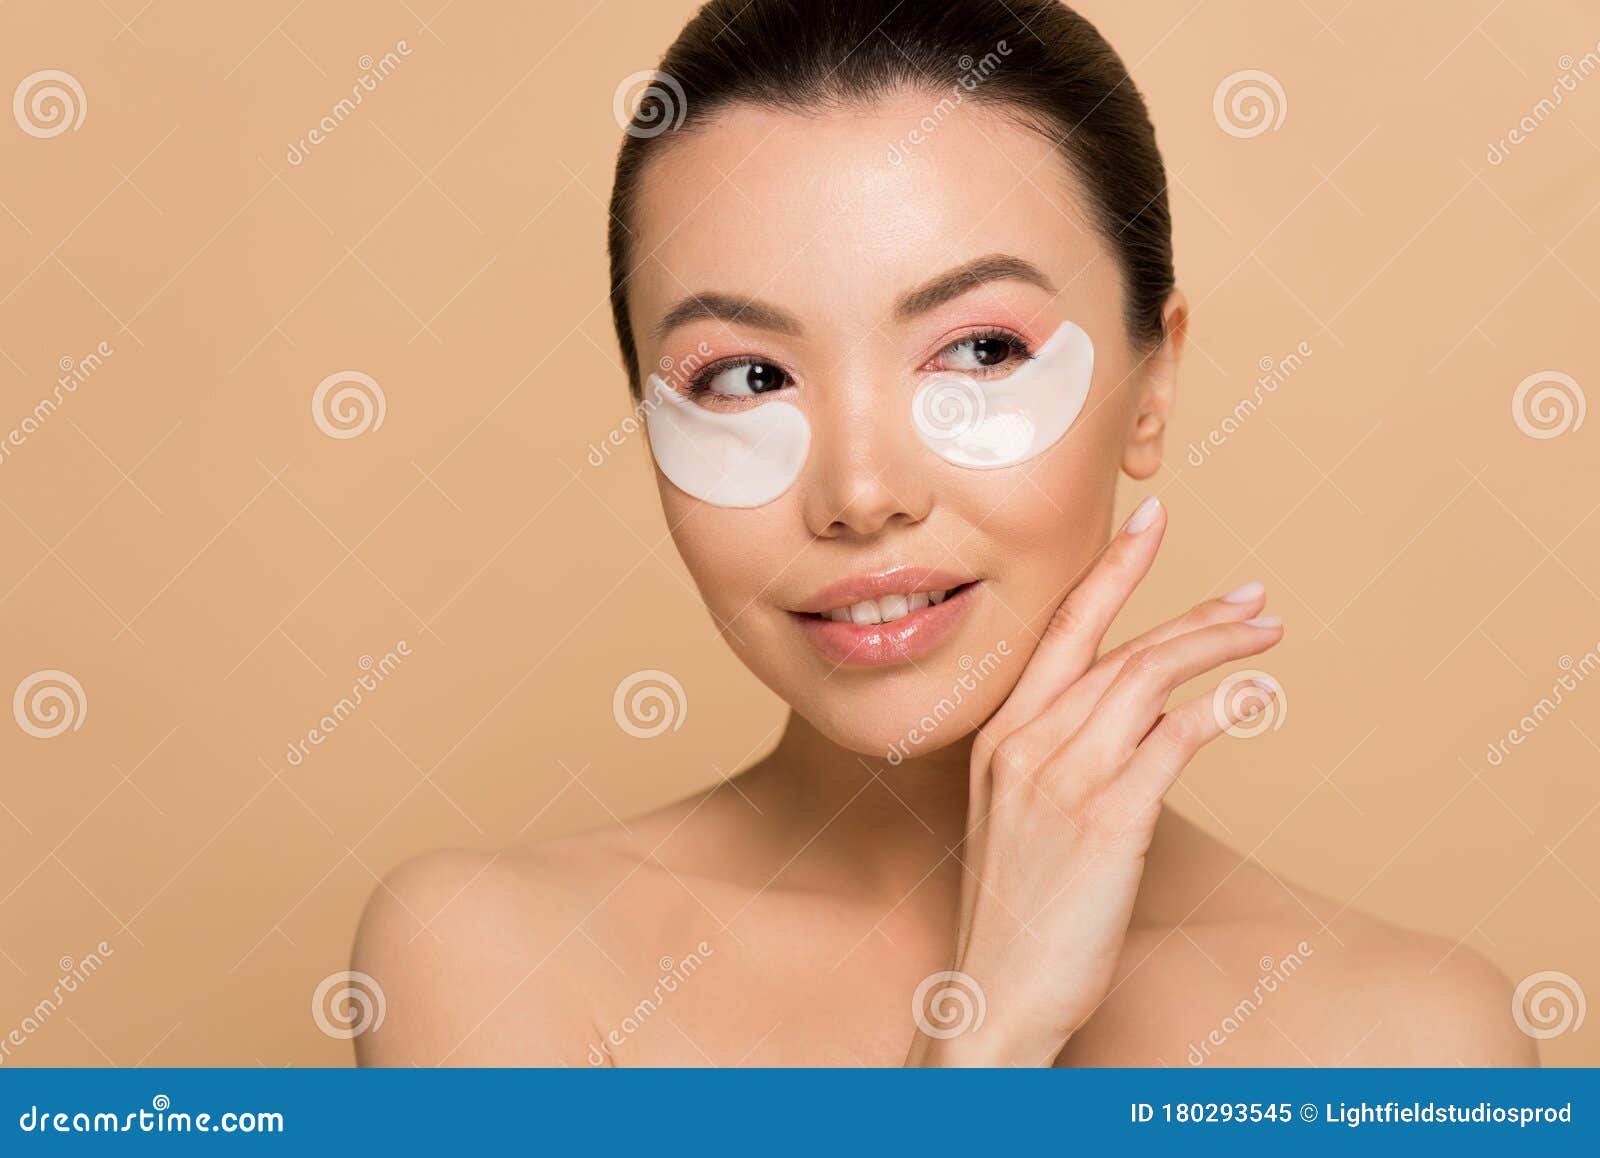 Beautiful Tender Nude Asian Girl With Collagen Eye Pads Stock Image